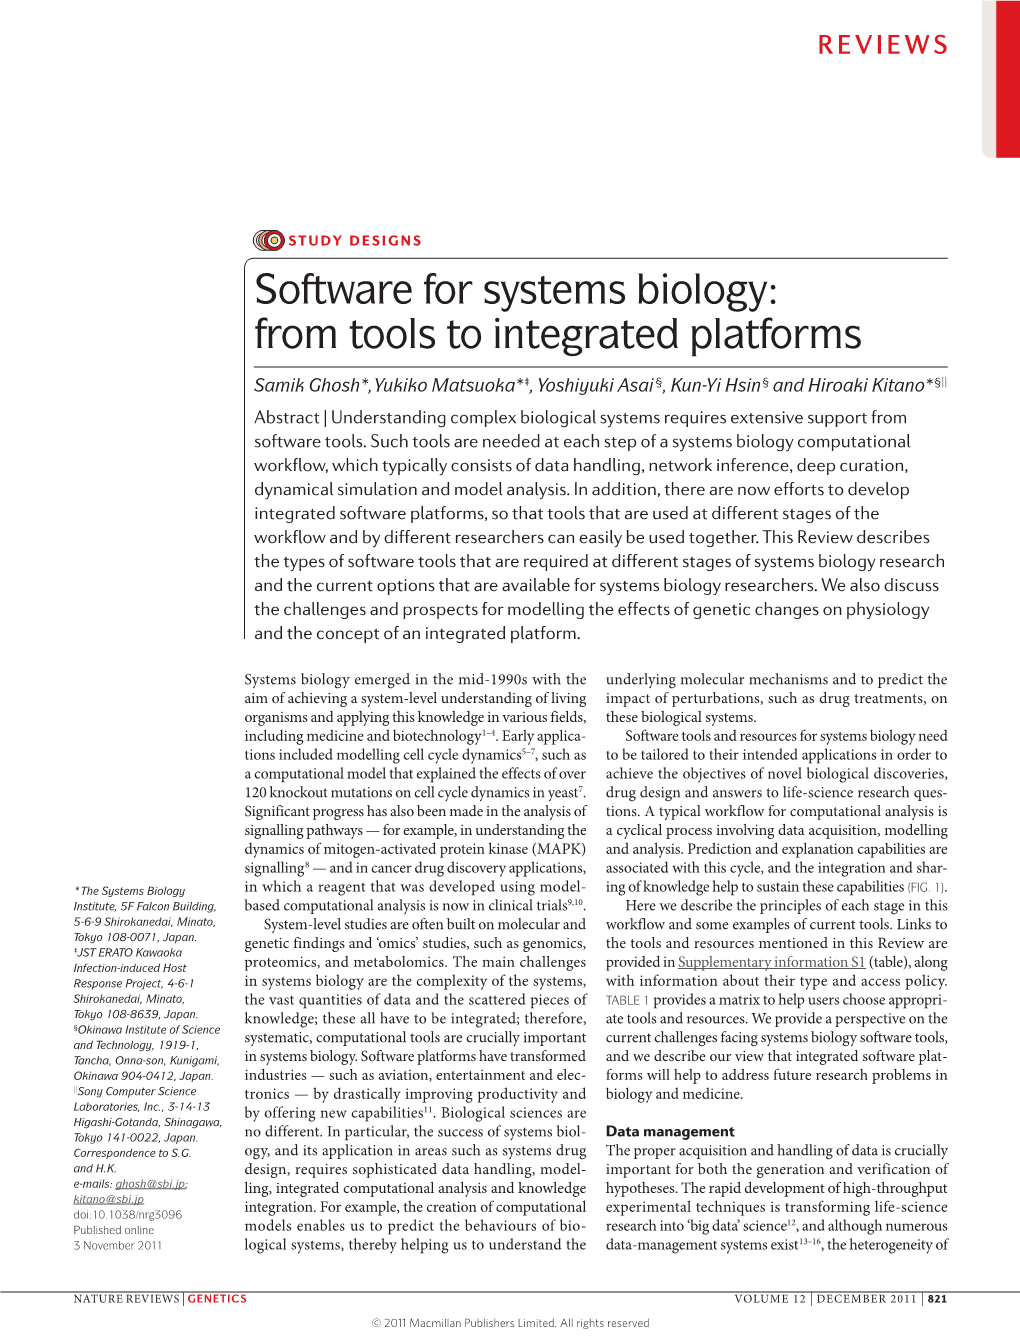 Software for Systems Biology: from Tools to Integrated Platforms